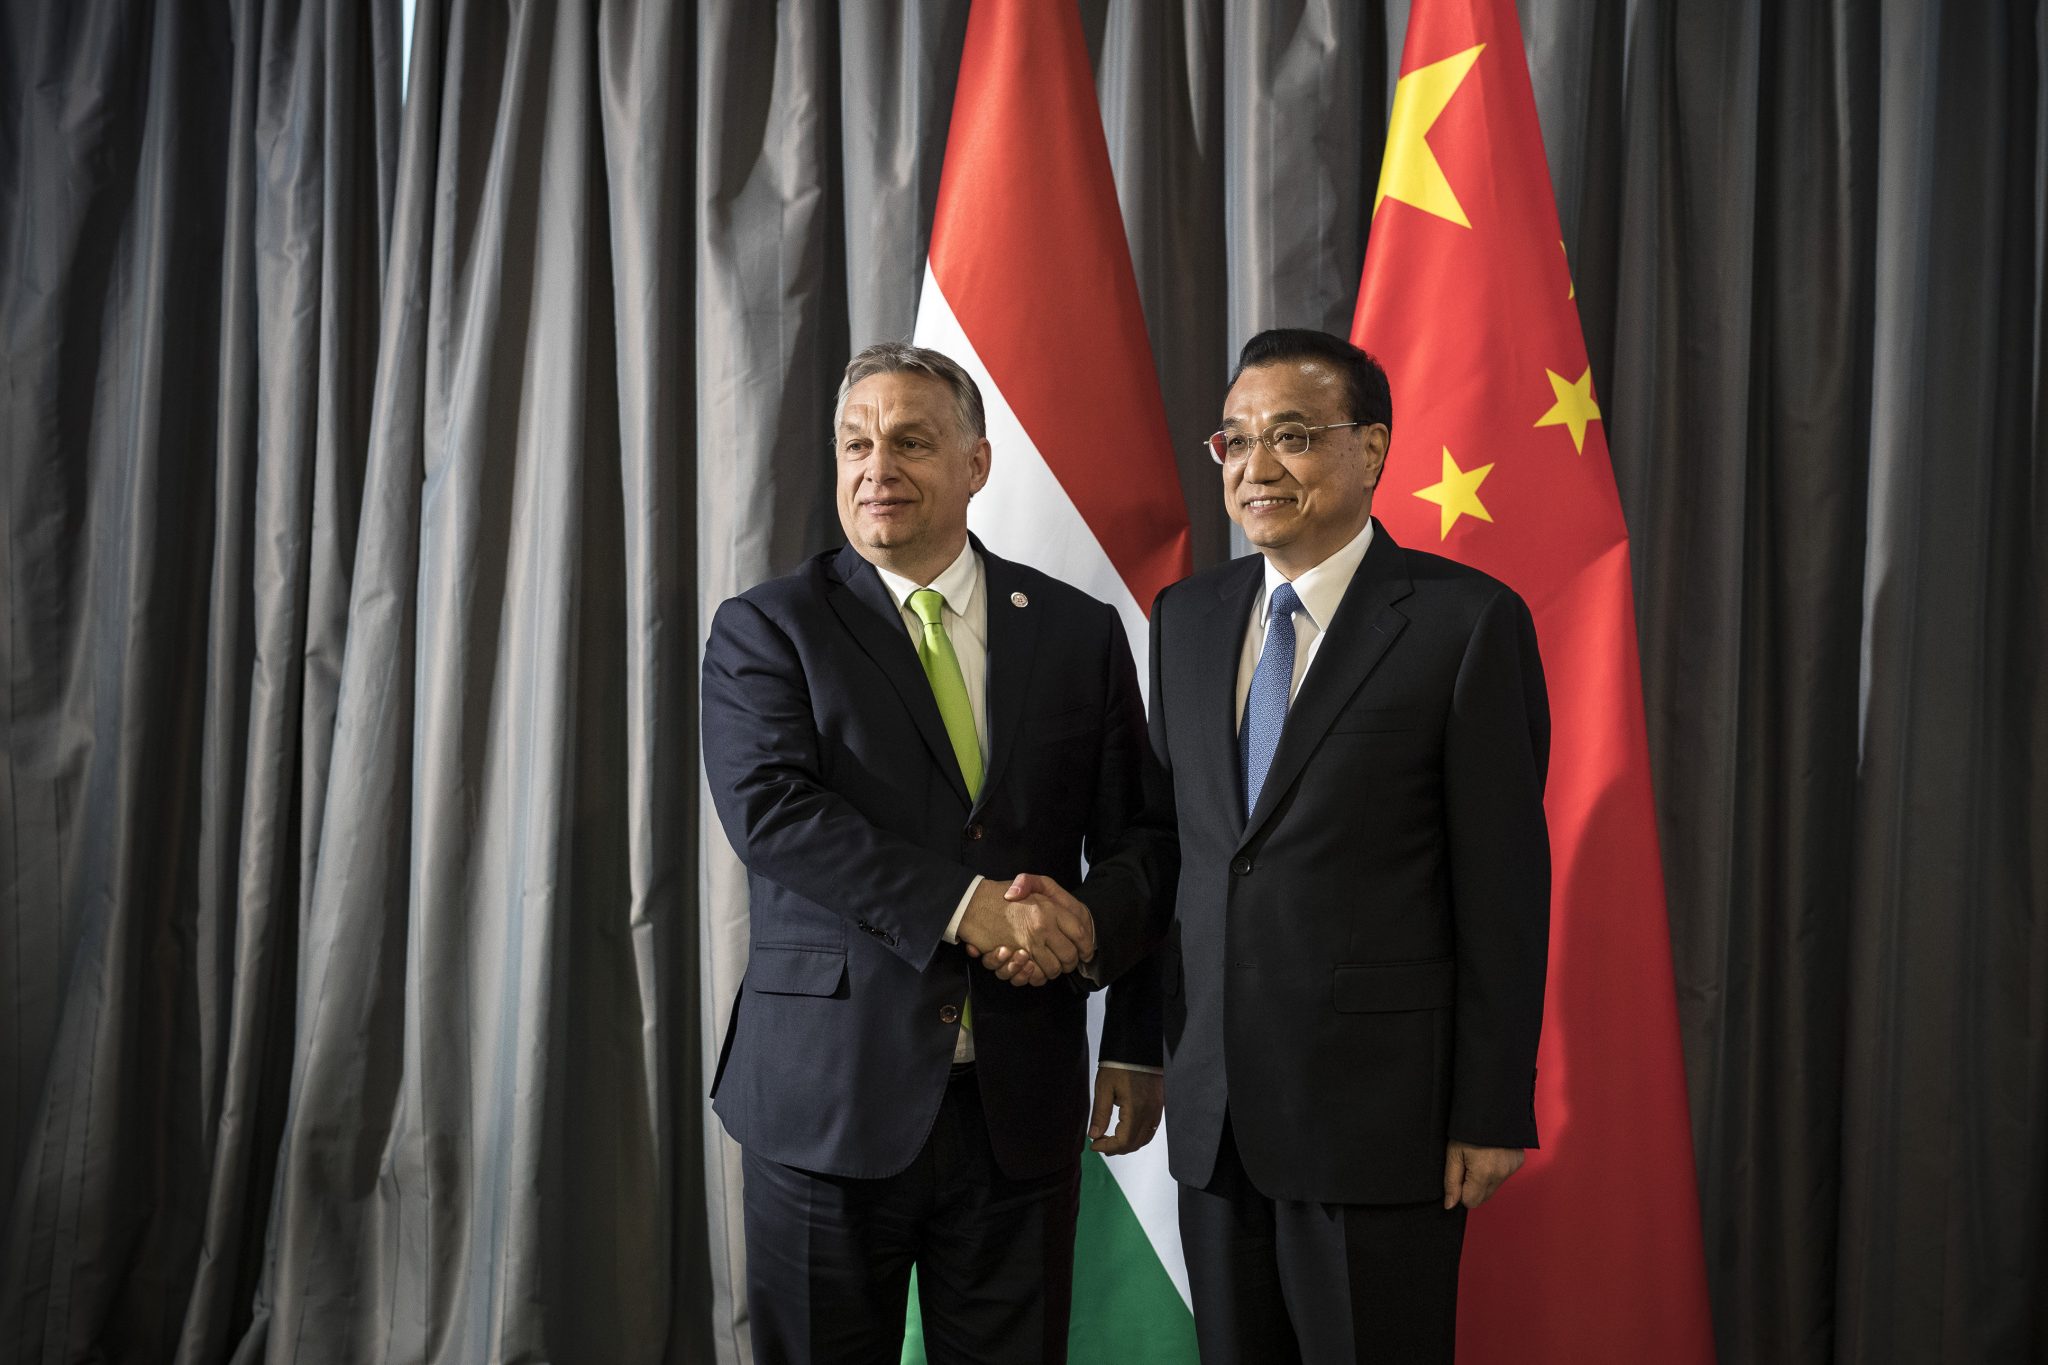 Press Roundup: Chinese Fudan University to Build Campus in Budapest